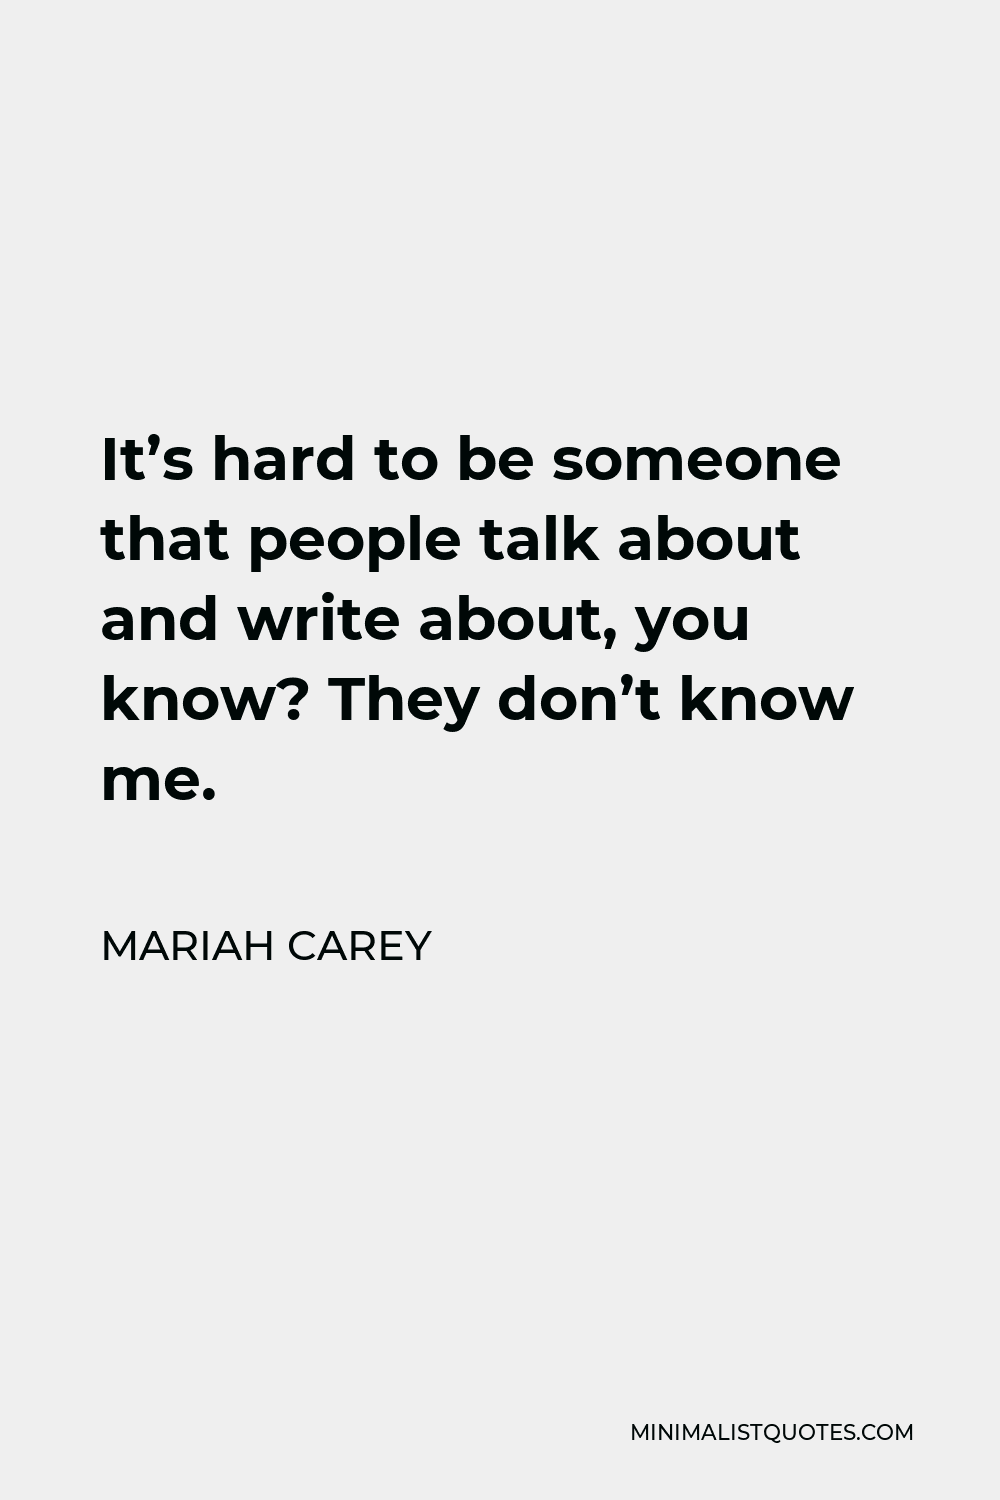 Mariah Carey Quote - It’s hard to be someone that people talk about and write about, you know? They don’t know me.